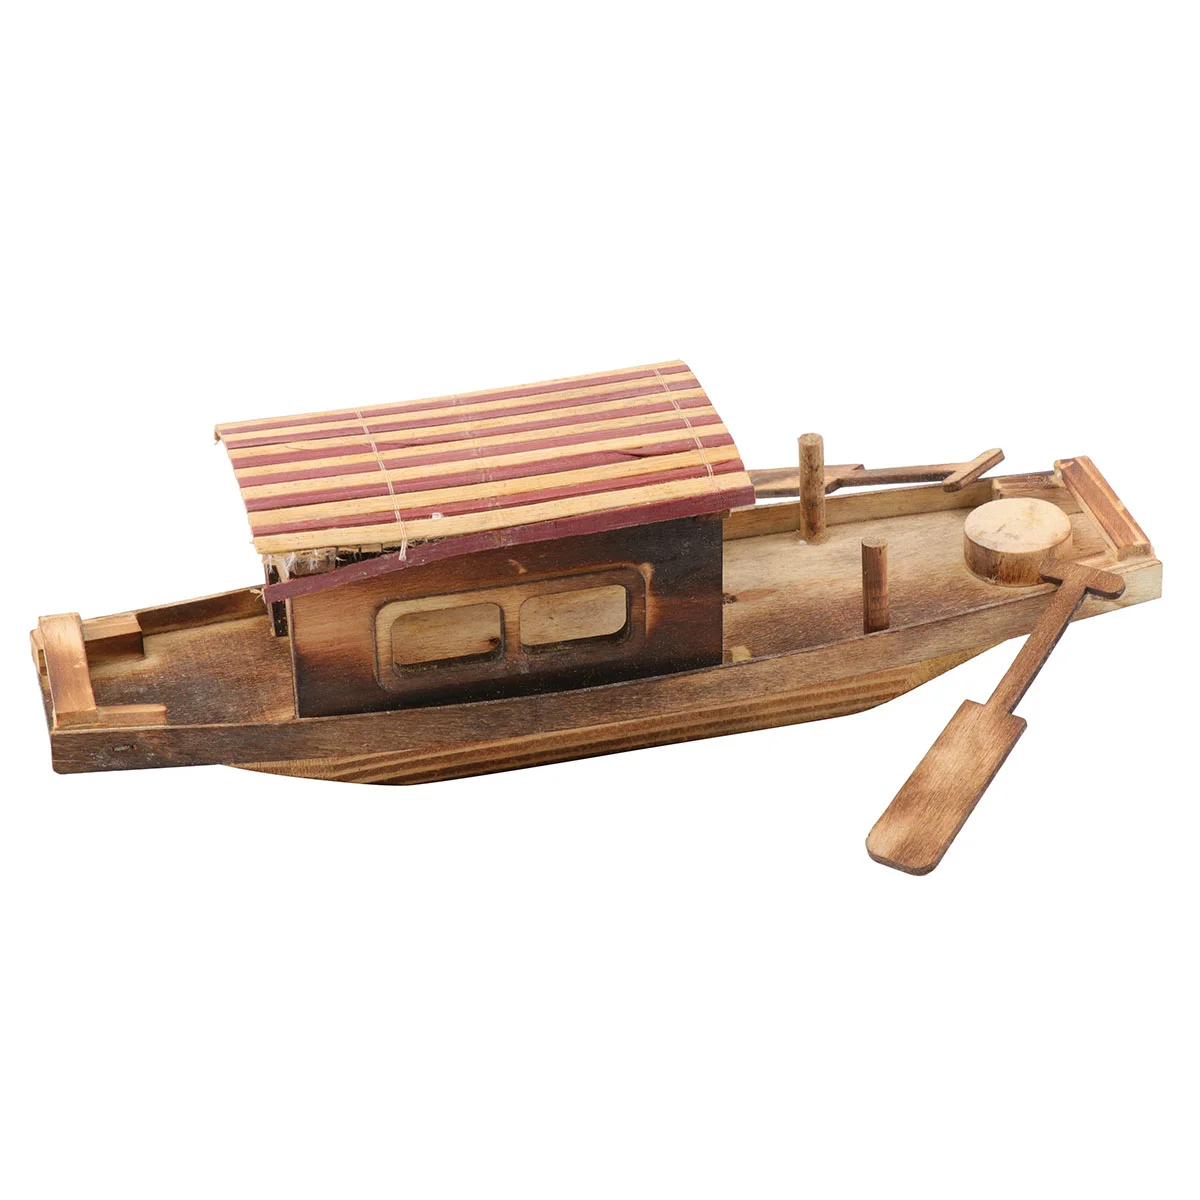 Wooden Toys Wood Canoe Boat Boat Ornament Wood Fishing Boat Nautical Gifts Wooden Boat Model